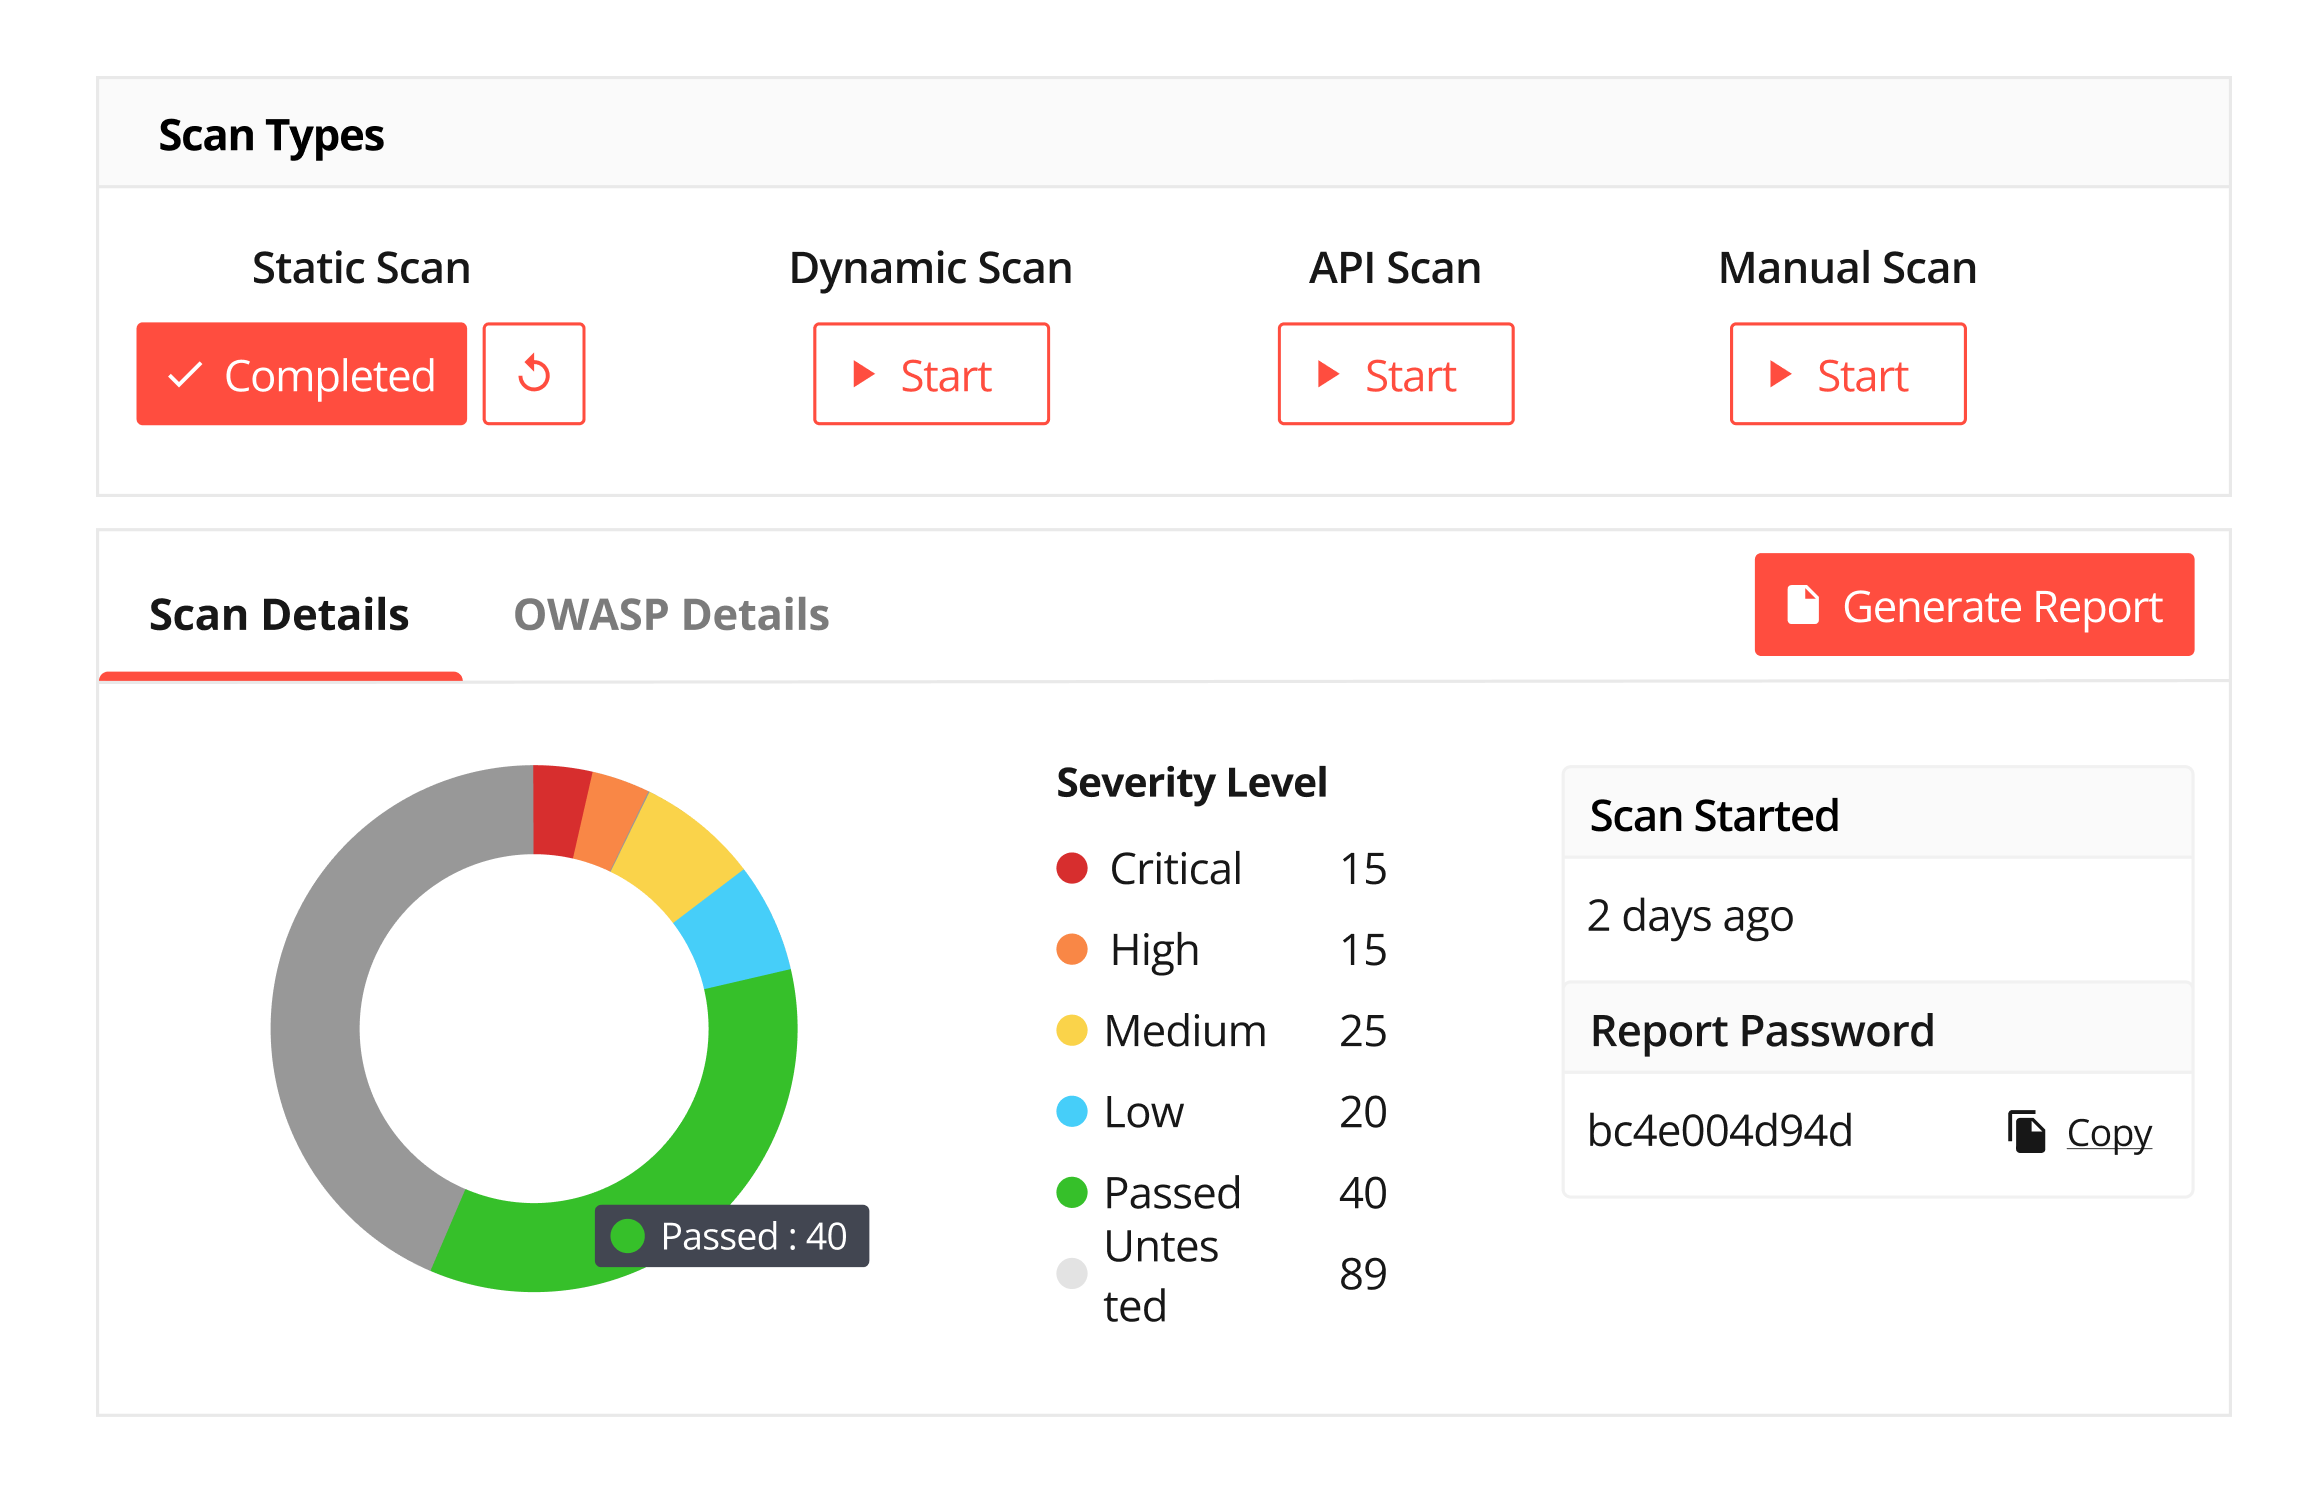 The best mobile application security testing tool - Appknox and its detailed vulnerability assessment report showing the severity level of the detected vulnerabilities